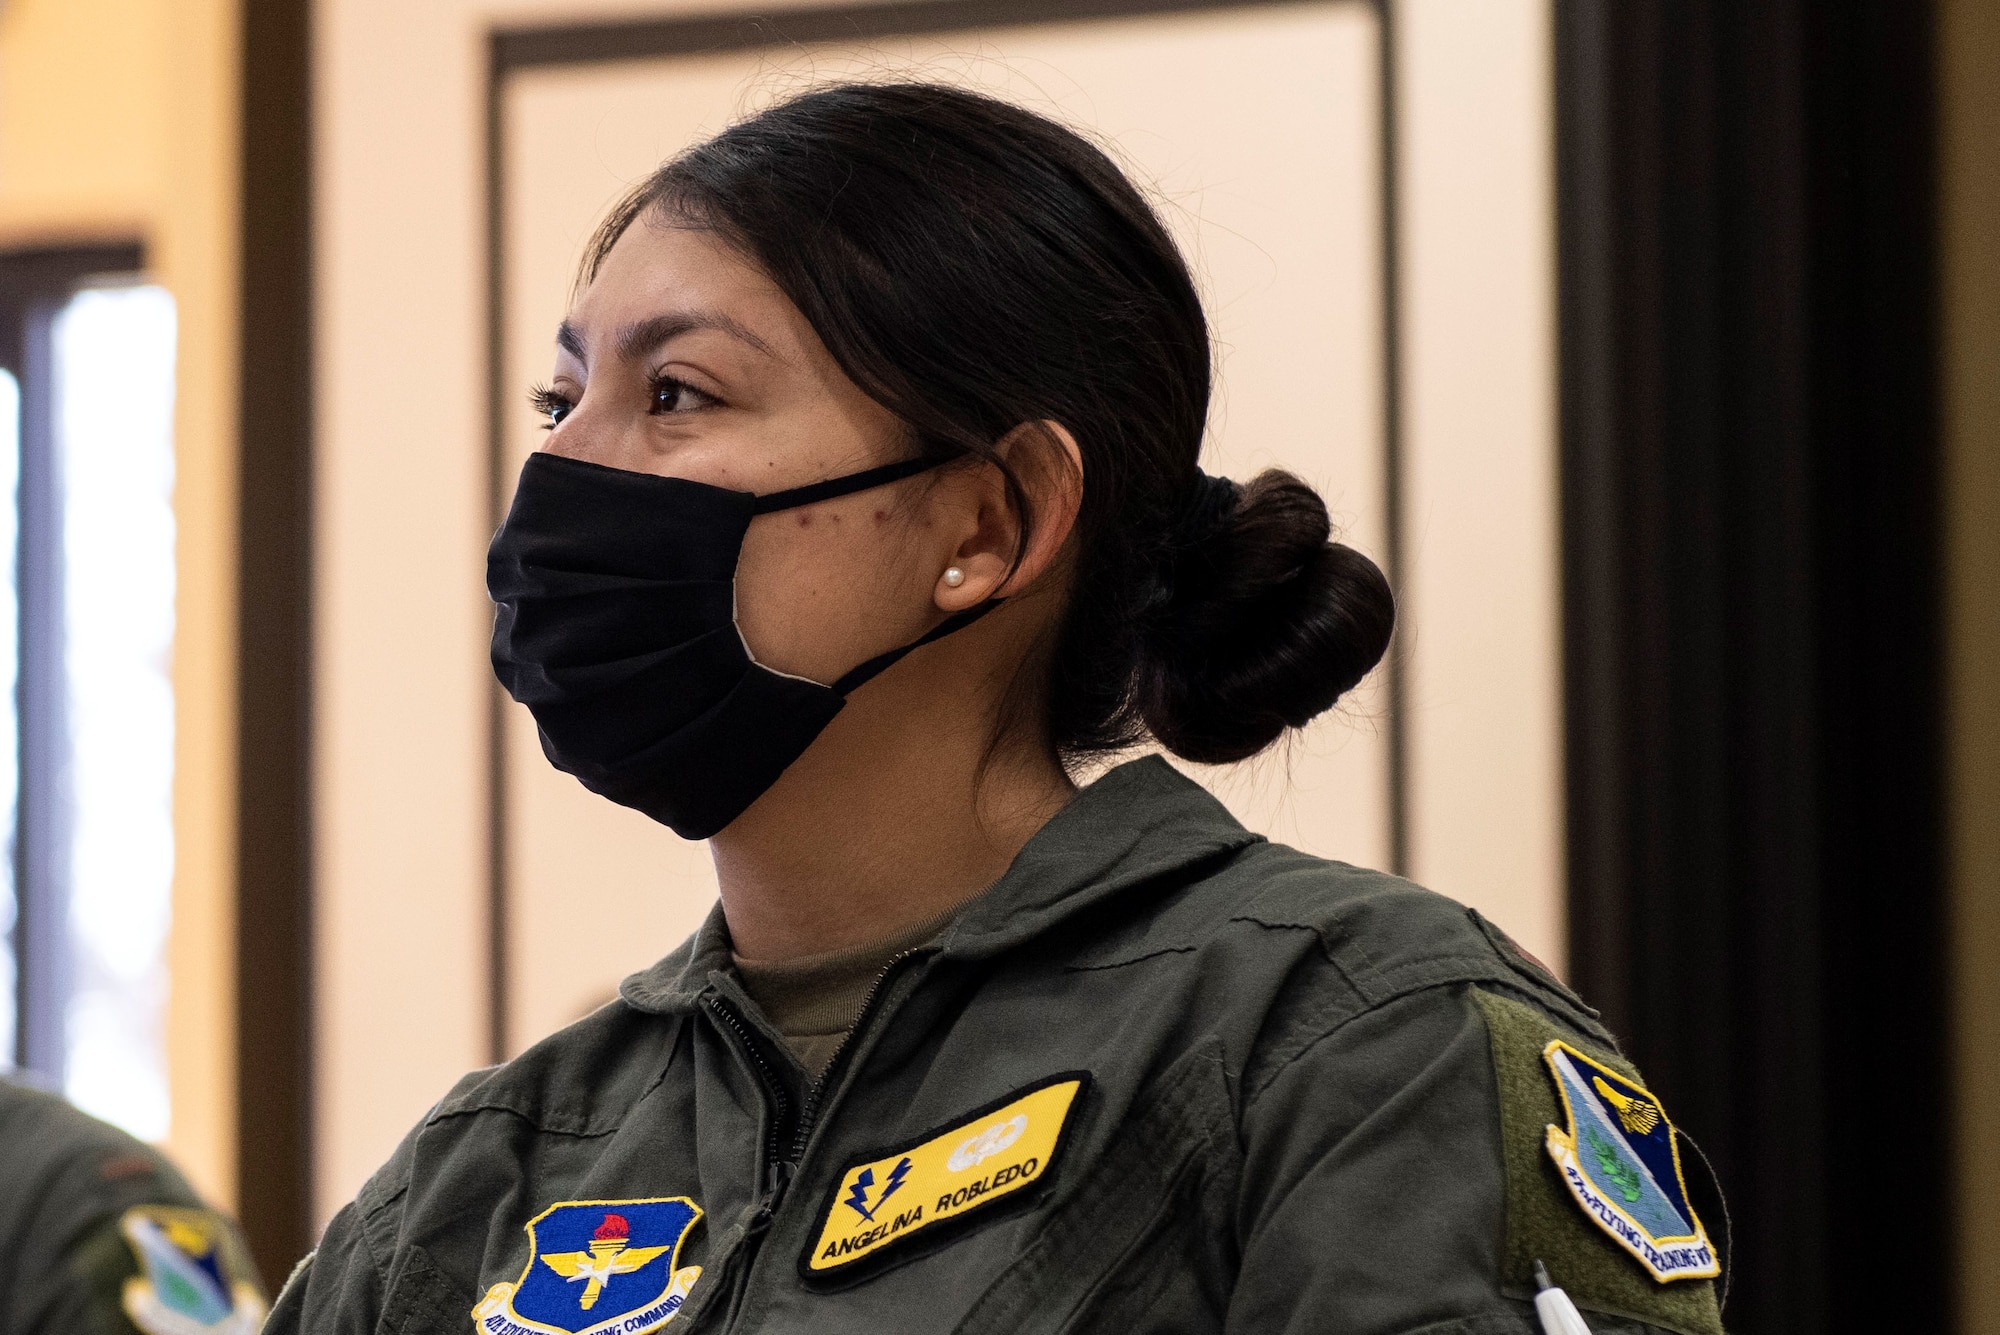 1st Lt. Angelina Robledo 47th Training Wing, student pilot, listens to a lecture from an instructor pilot Feb. 03, 2021 at Laughlin Air Force Base, Texas. This course is a newly implements tool to help prepare student pilots for their pilot training.